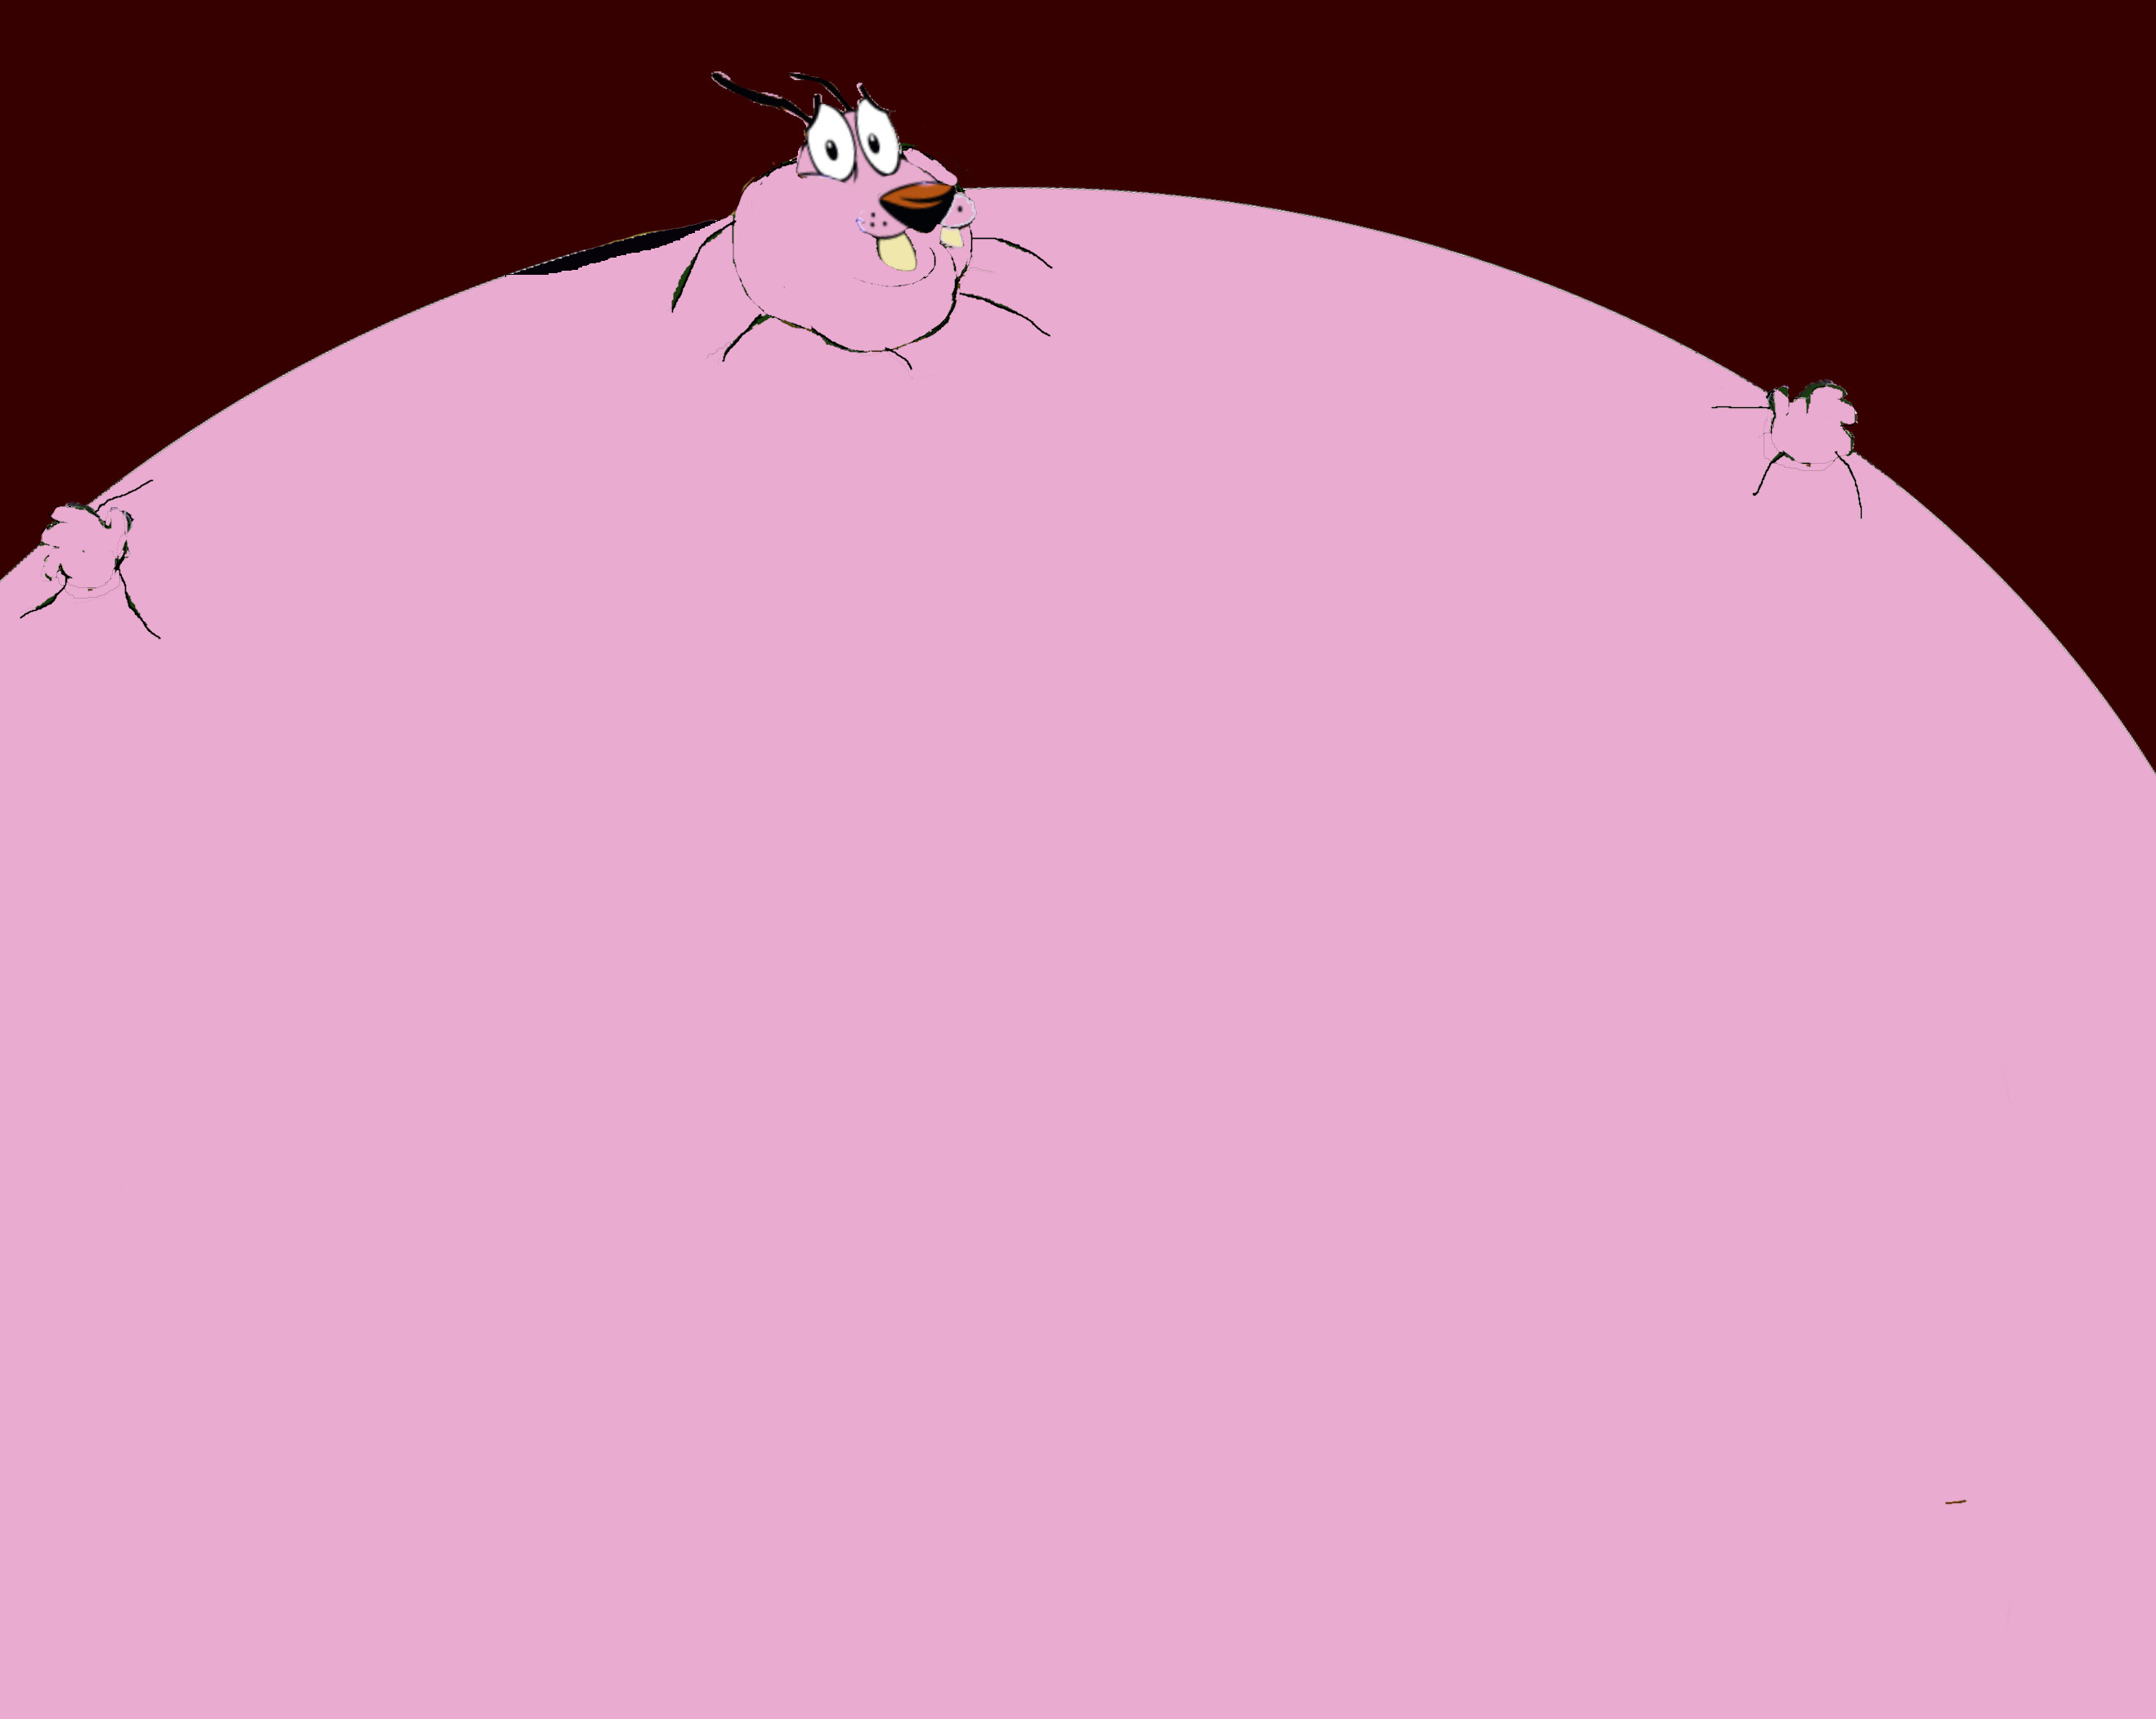 2637x2102 ... Inflated Courage the Cowardly Dog by InflationTime